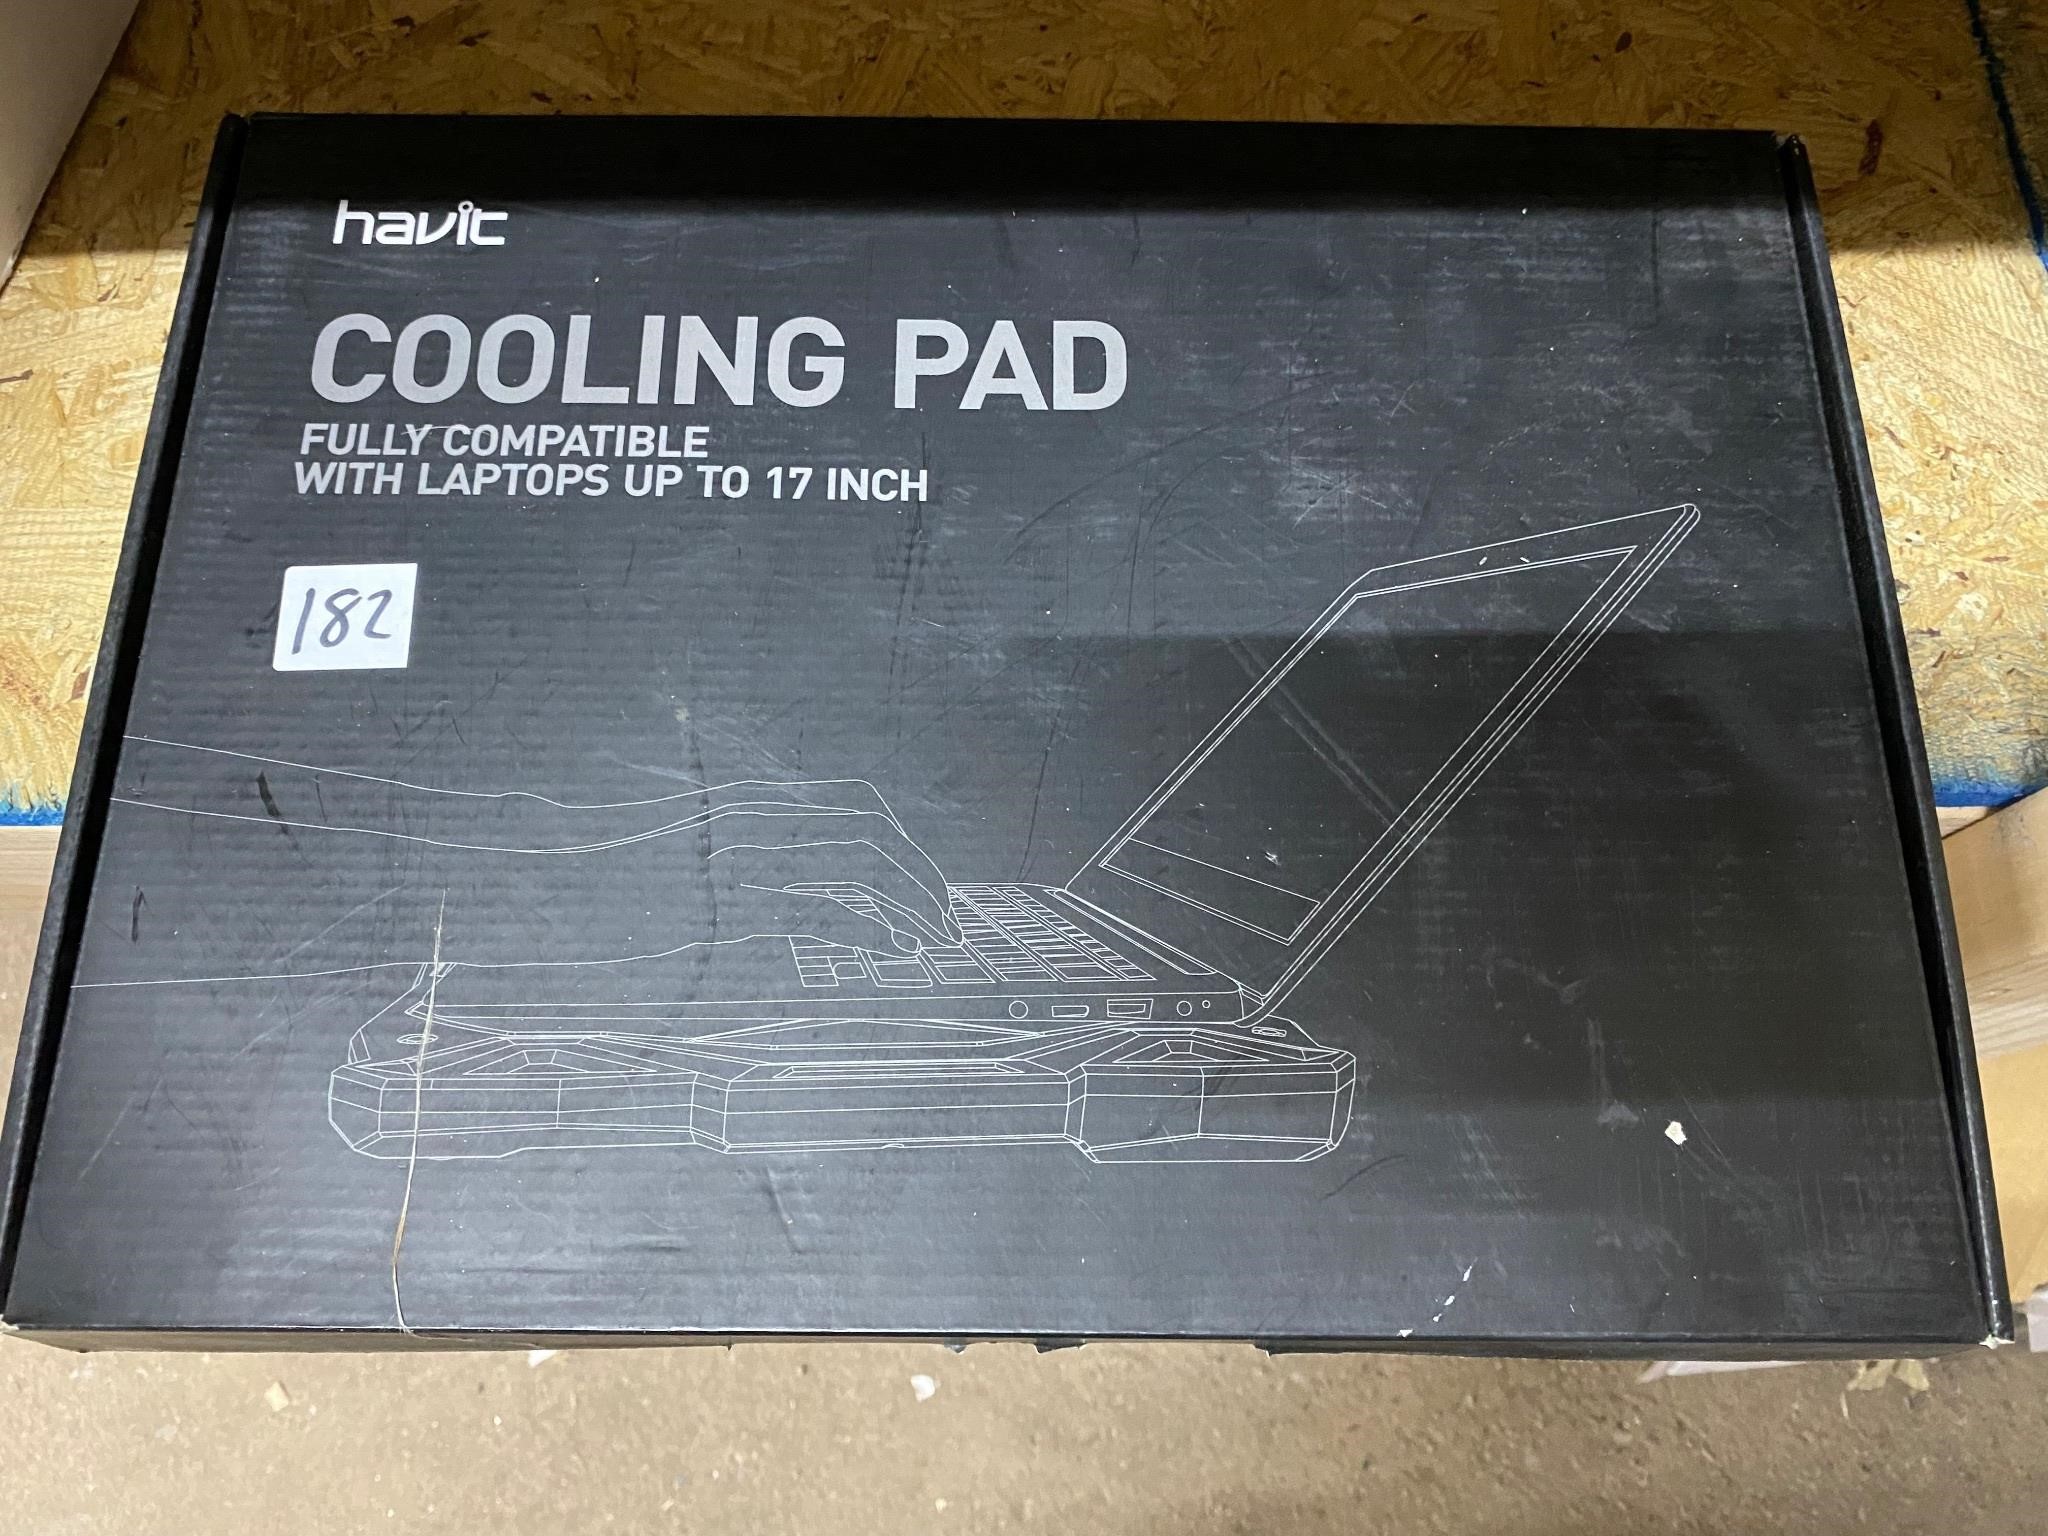 Havic Cooling Pad Compatible up to 17" Laptop